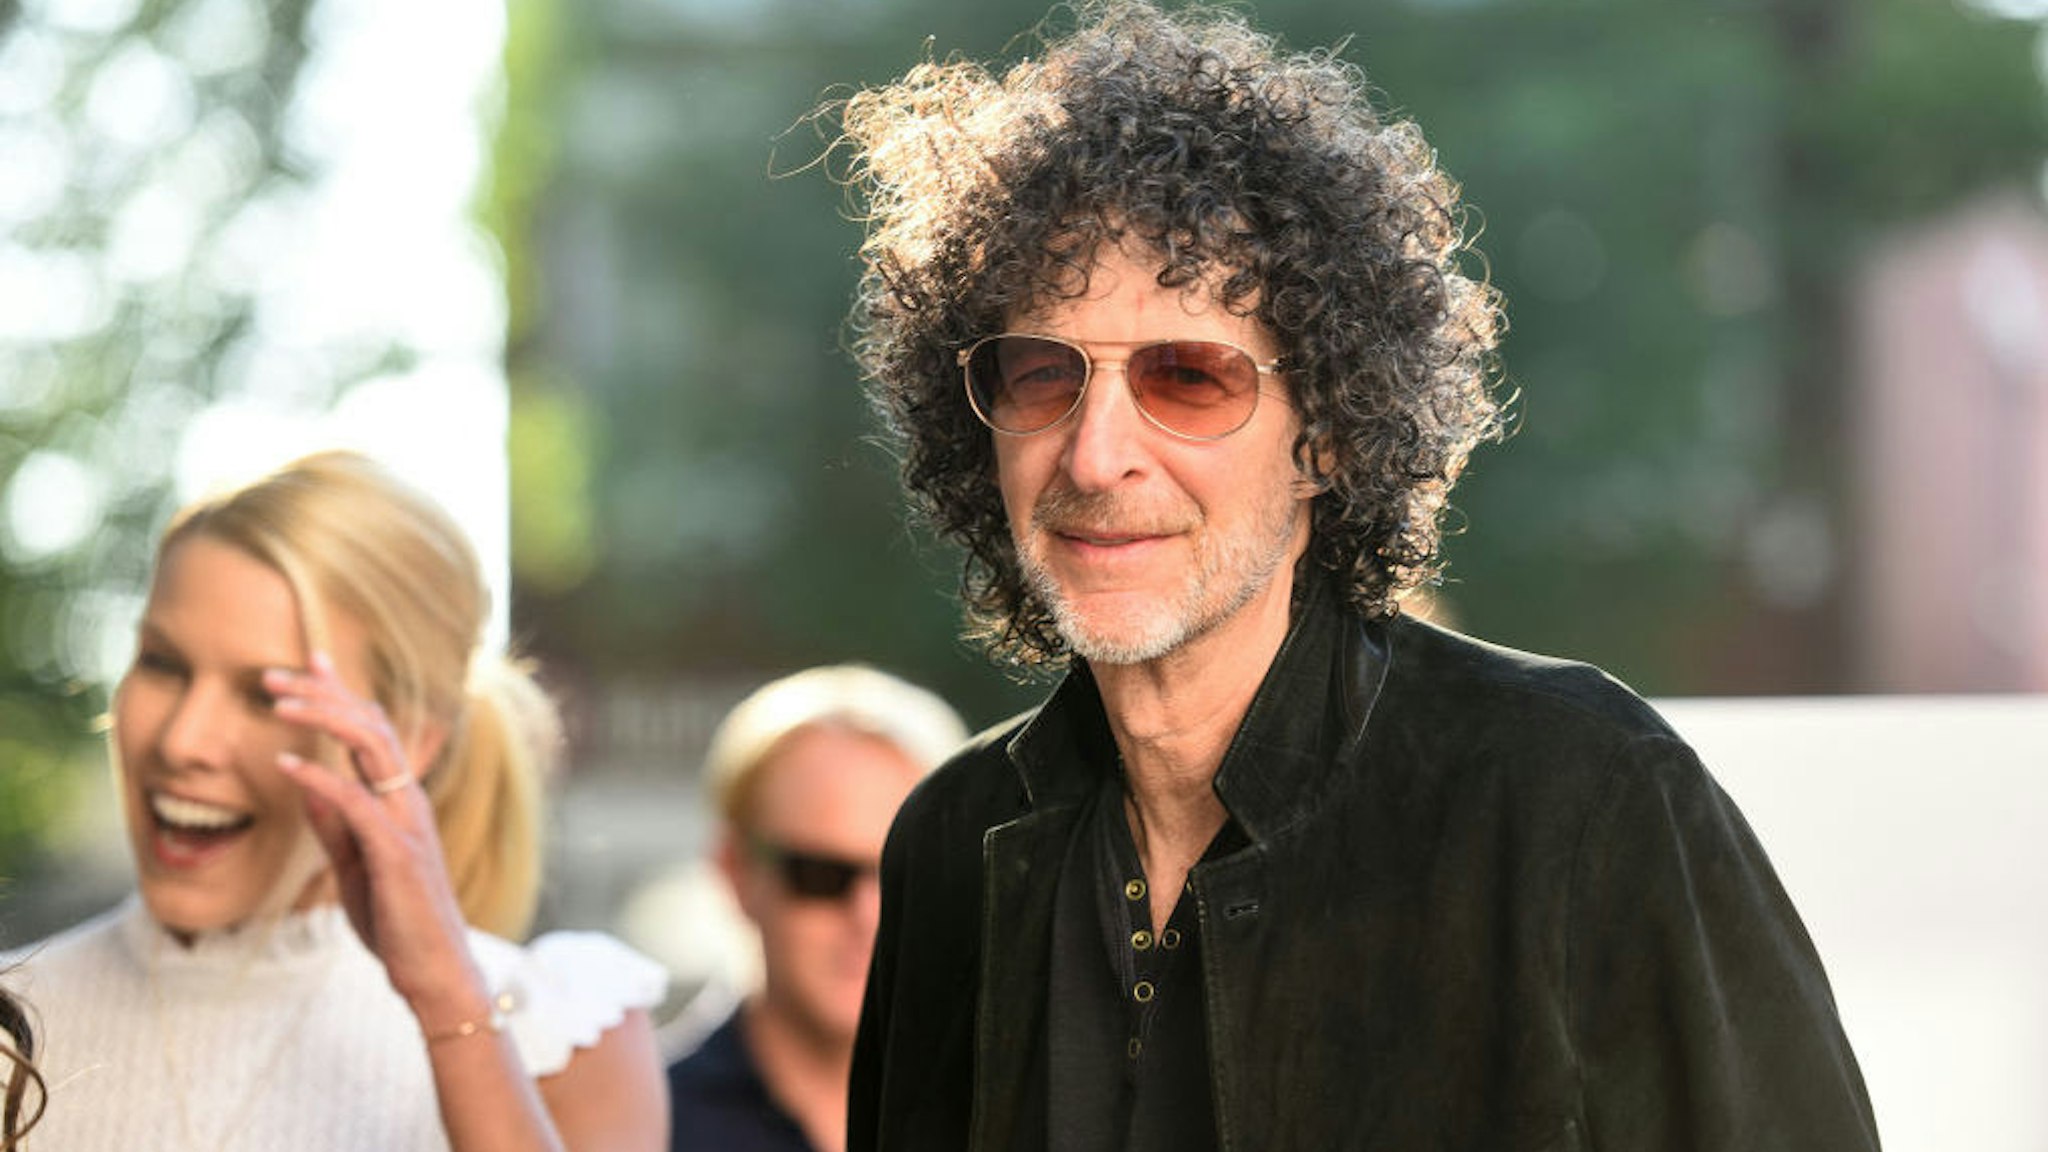 EAST HAMPTON, NEW YORK - JULY 13: Howard Stern attends Sony Pictures Classics &amp; The Cinema Society Host A Hamptons Screening Of "David Crosby: Remember My Name" at United Artists East Hampton Cinema on July 13, 2019 in East Hampton, New York. (Photo by Jared Siskin/Patrick McMullan via Getty Images)